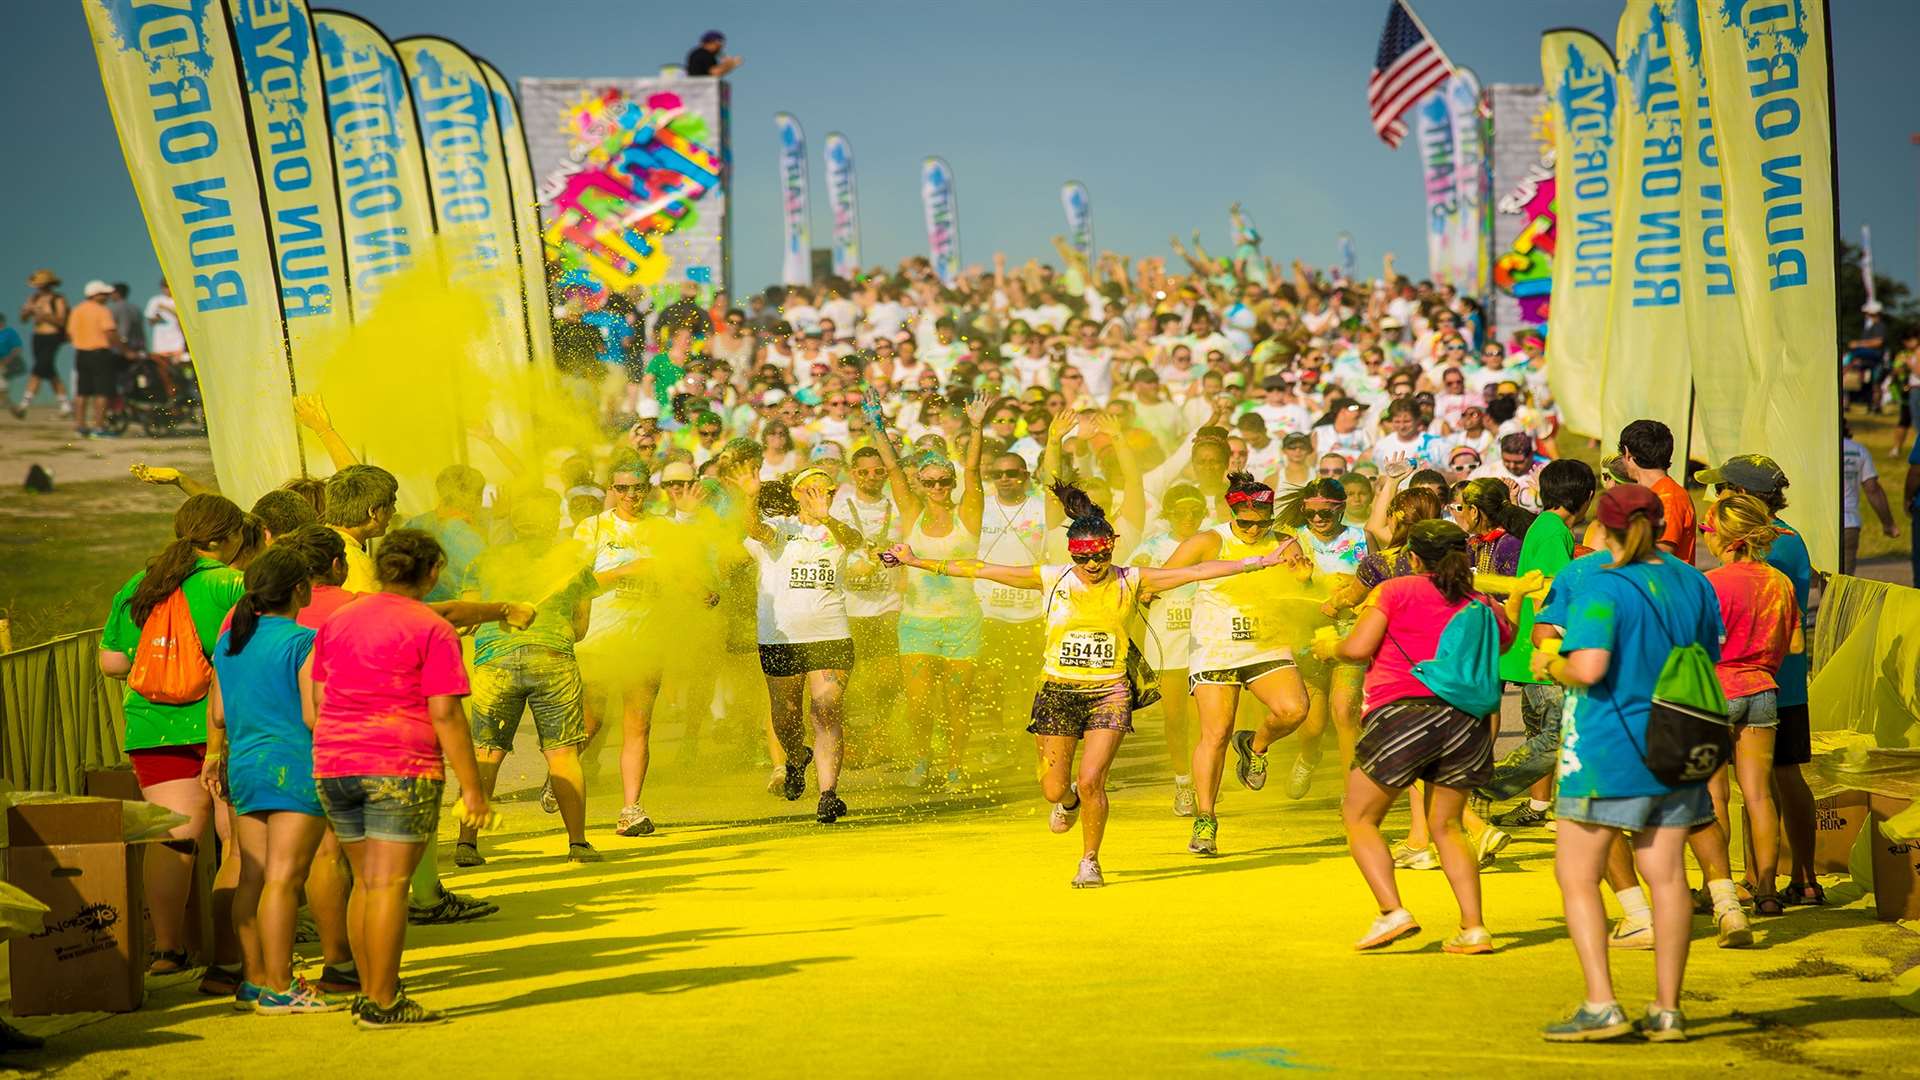 Participants will be arrive dressed in white and will be covered in a range of colourful paint during the race